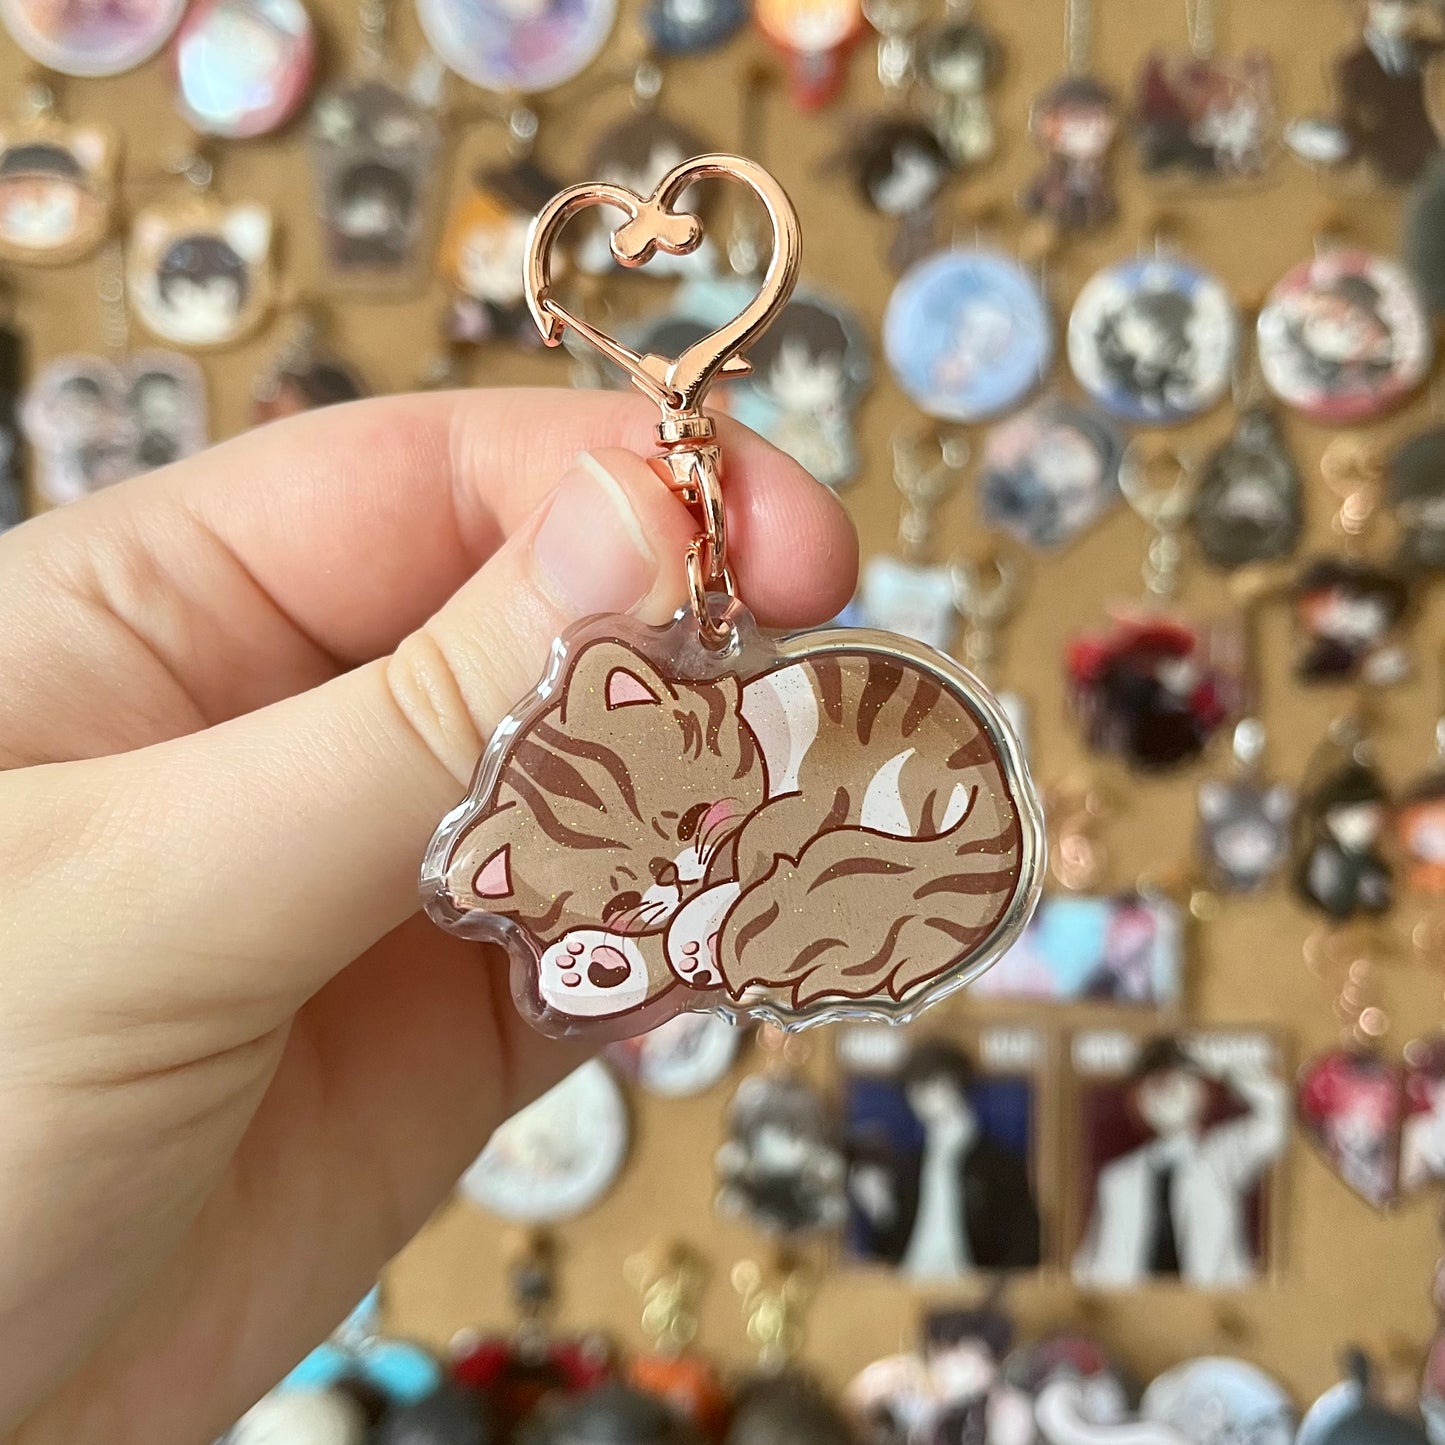 Cookie the Cat Keyring / Charm Fanmade Merch